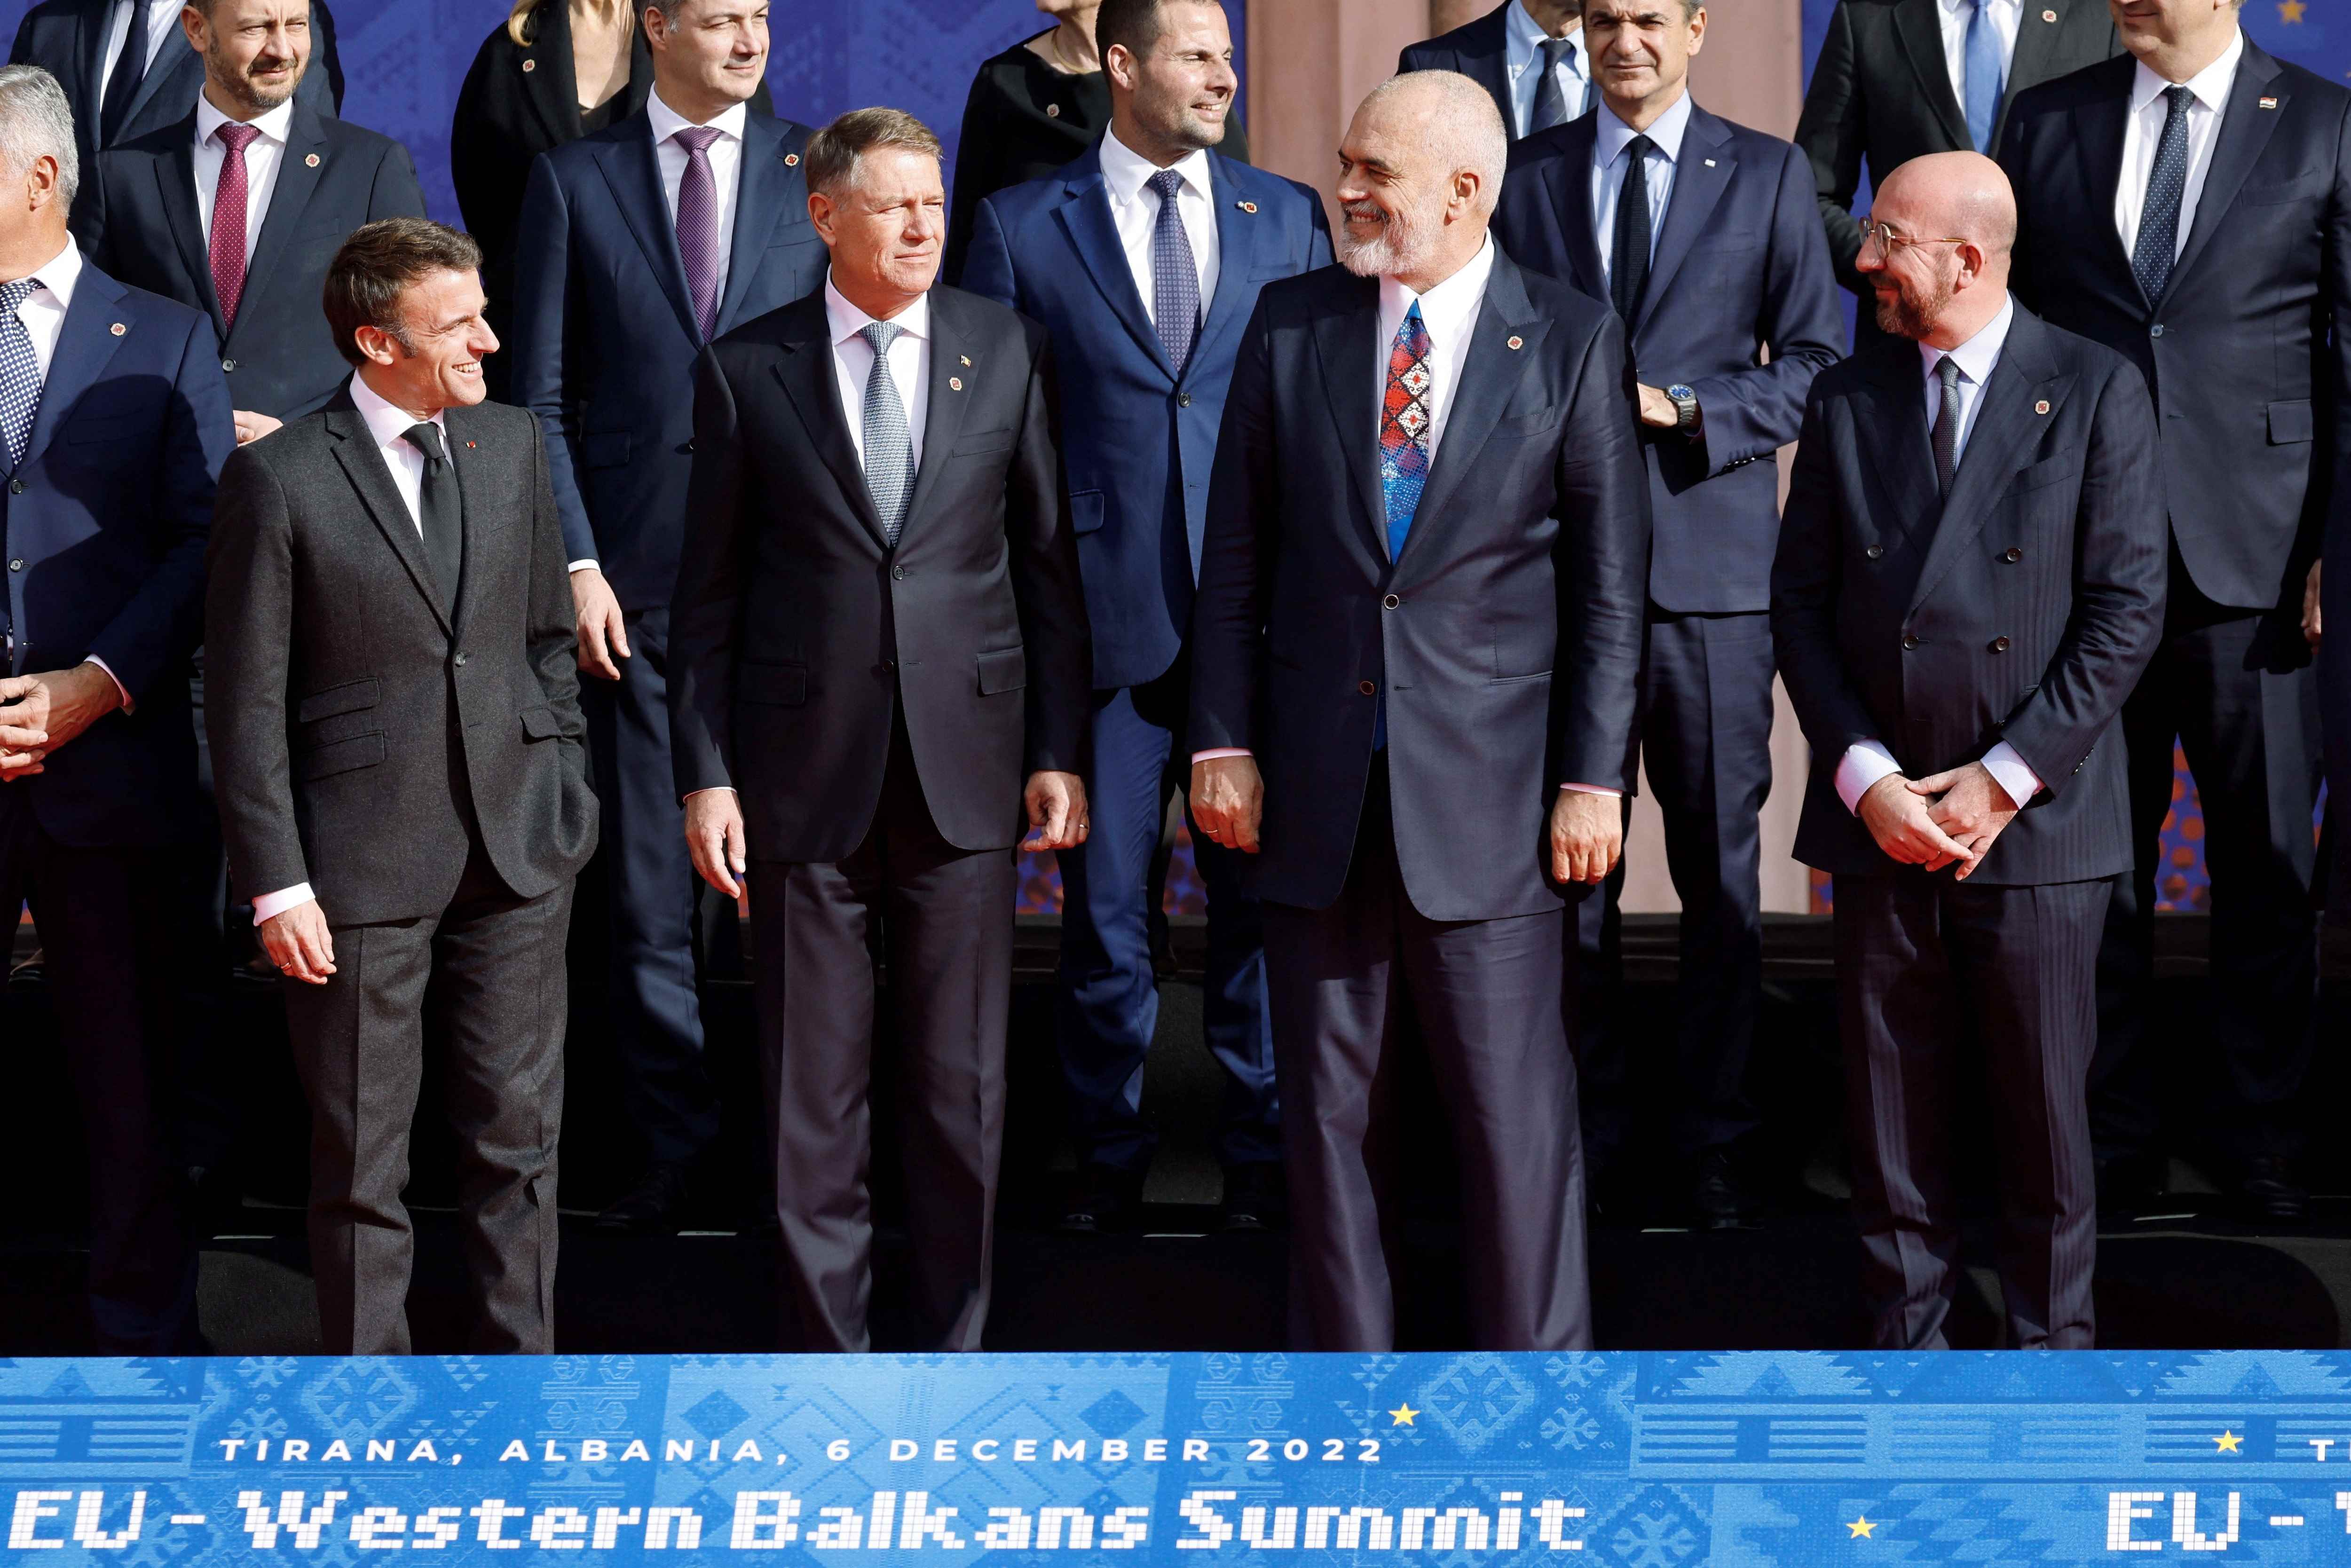 From left to right, front row: French President Emmanuel Macron, Romanian President Klaus Werner Iohannis, Prime Minister of Albania Edi Rama and President of the European Council Charles Michel, on December 6, 2022 in Tirana.